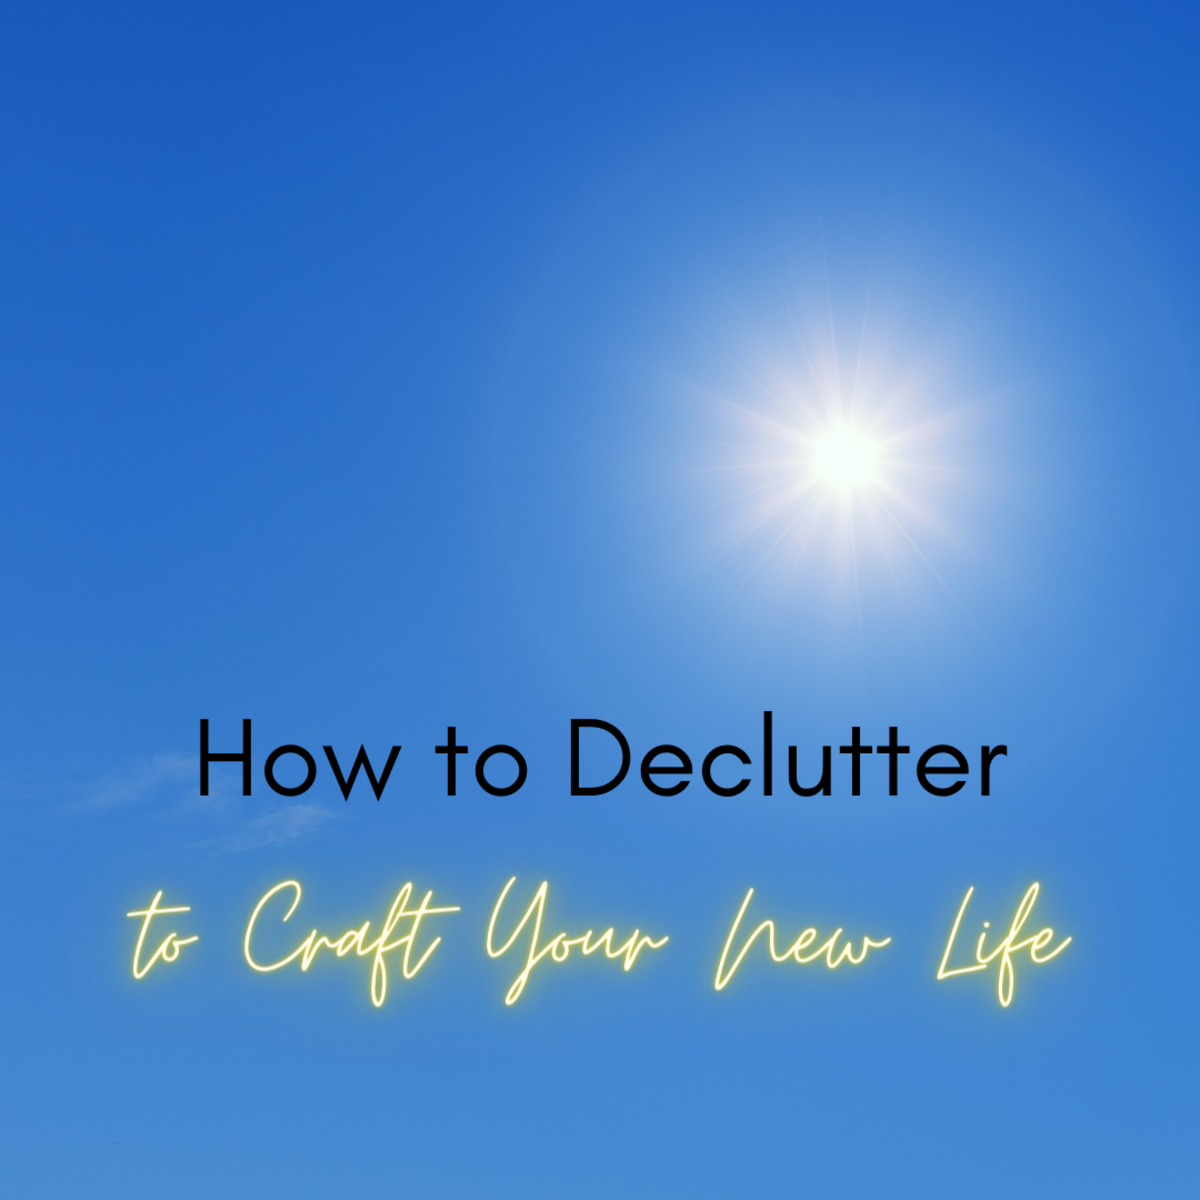 Top 15 Practical Ways to Declutter Your Home and Life!